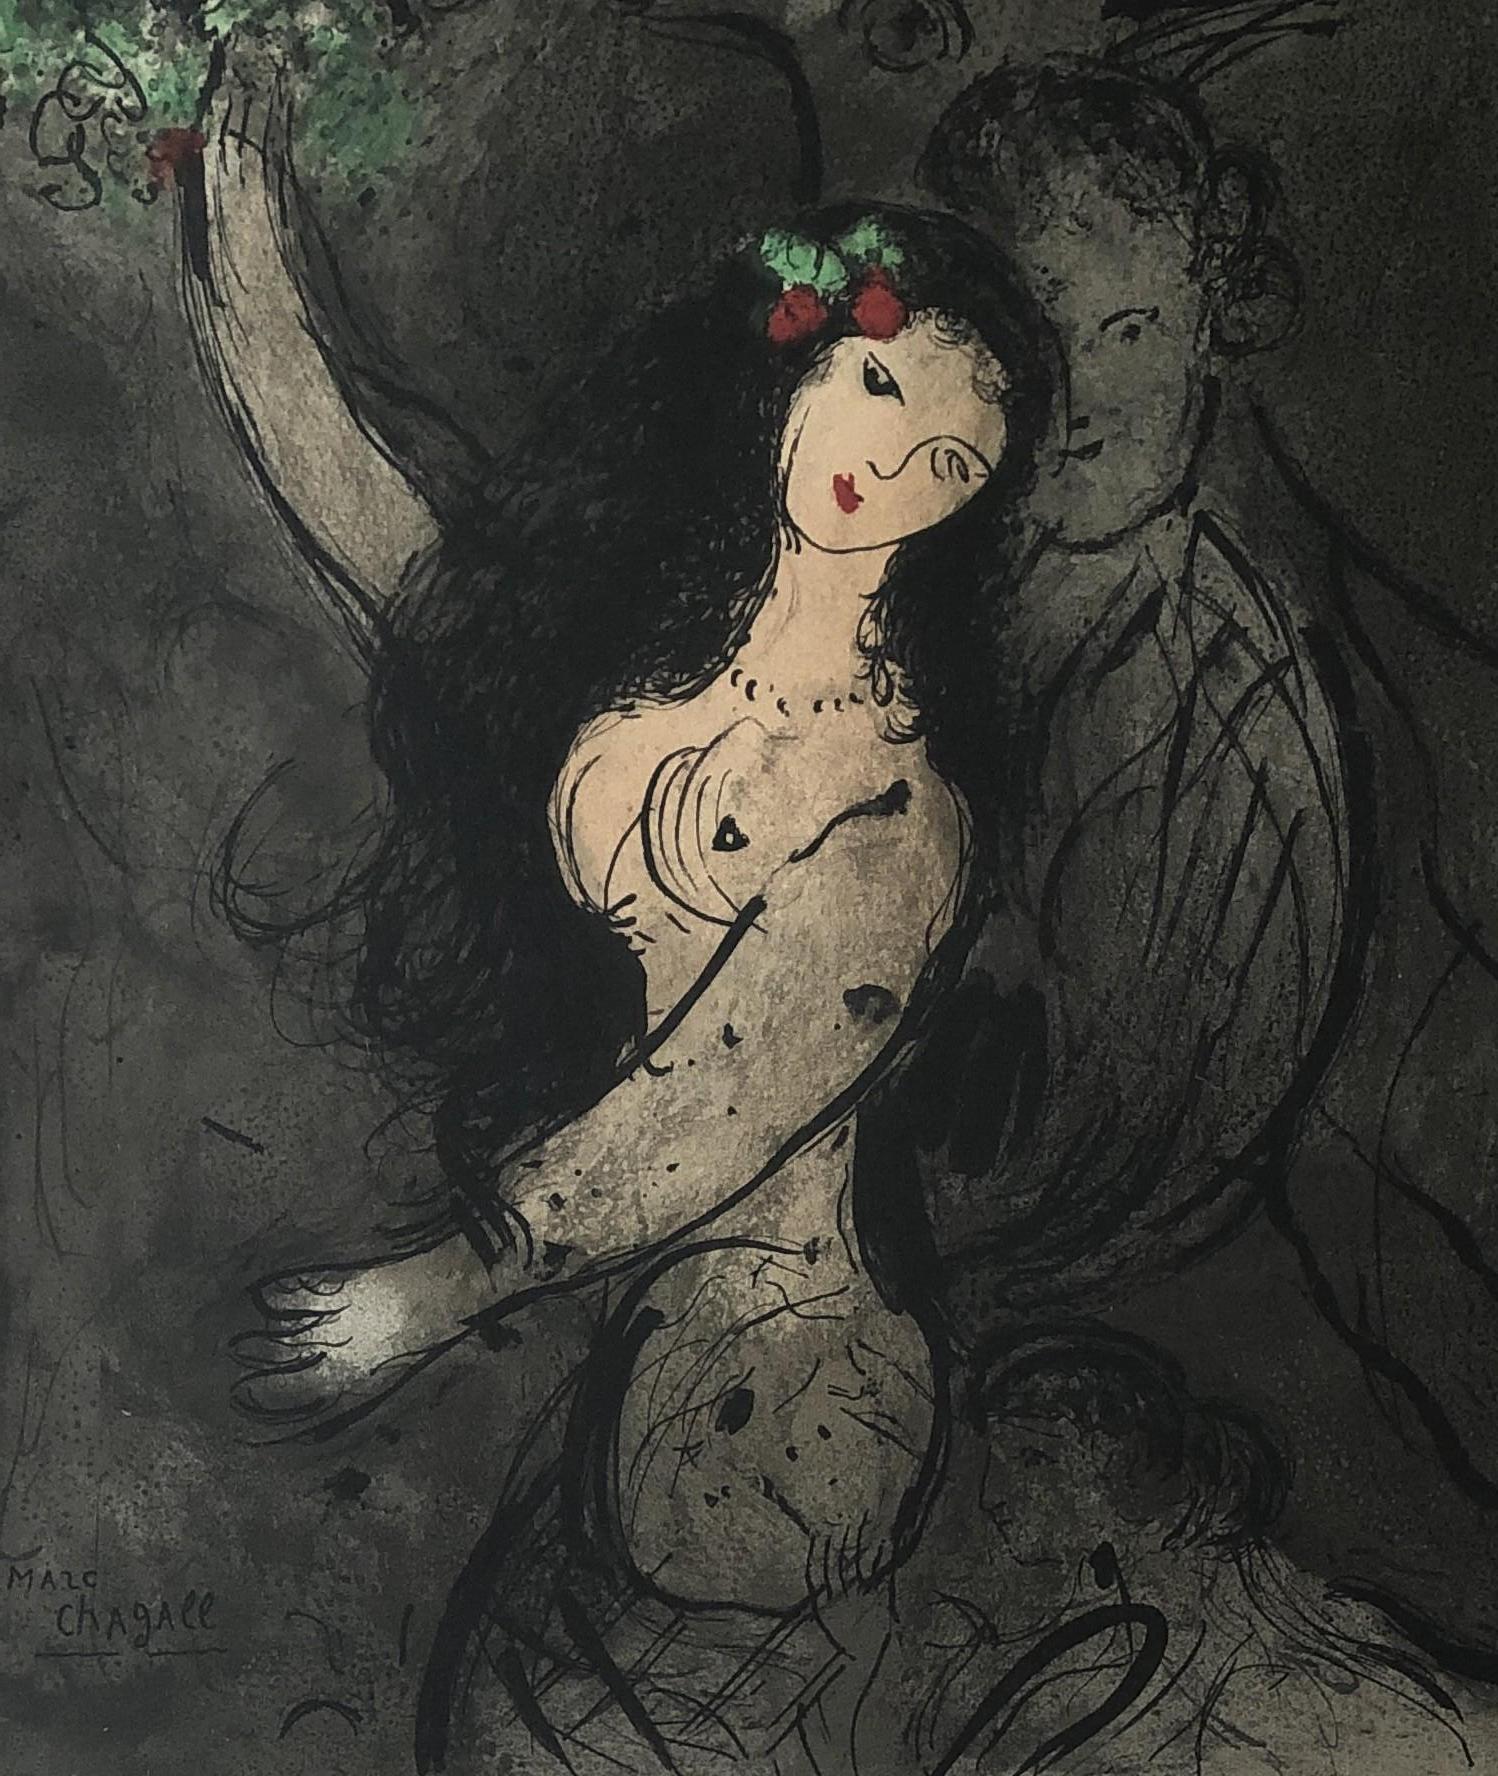 Woman With Flowers - Original Lithograph Signed in the Plate - Mourlot 383 - Black Figurative Print by Marc Chagall